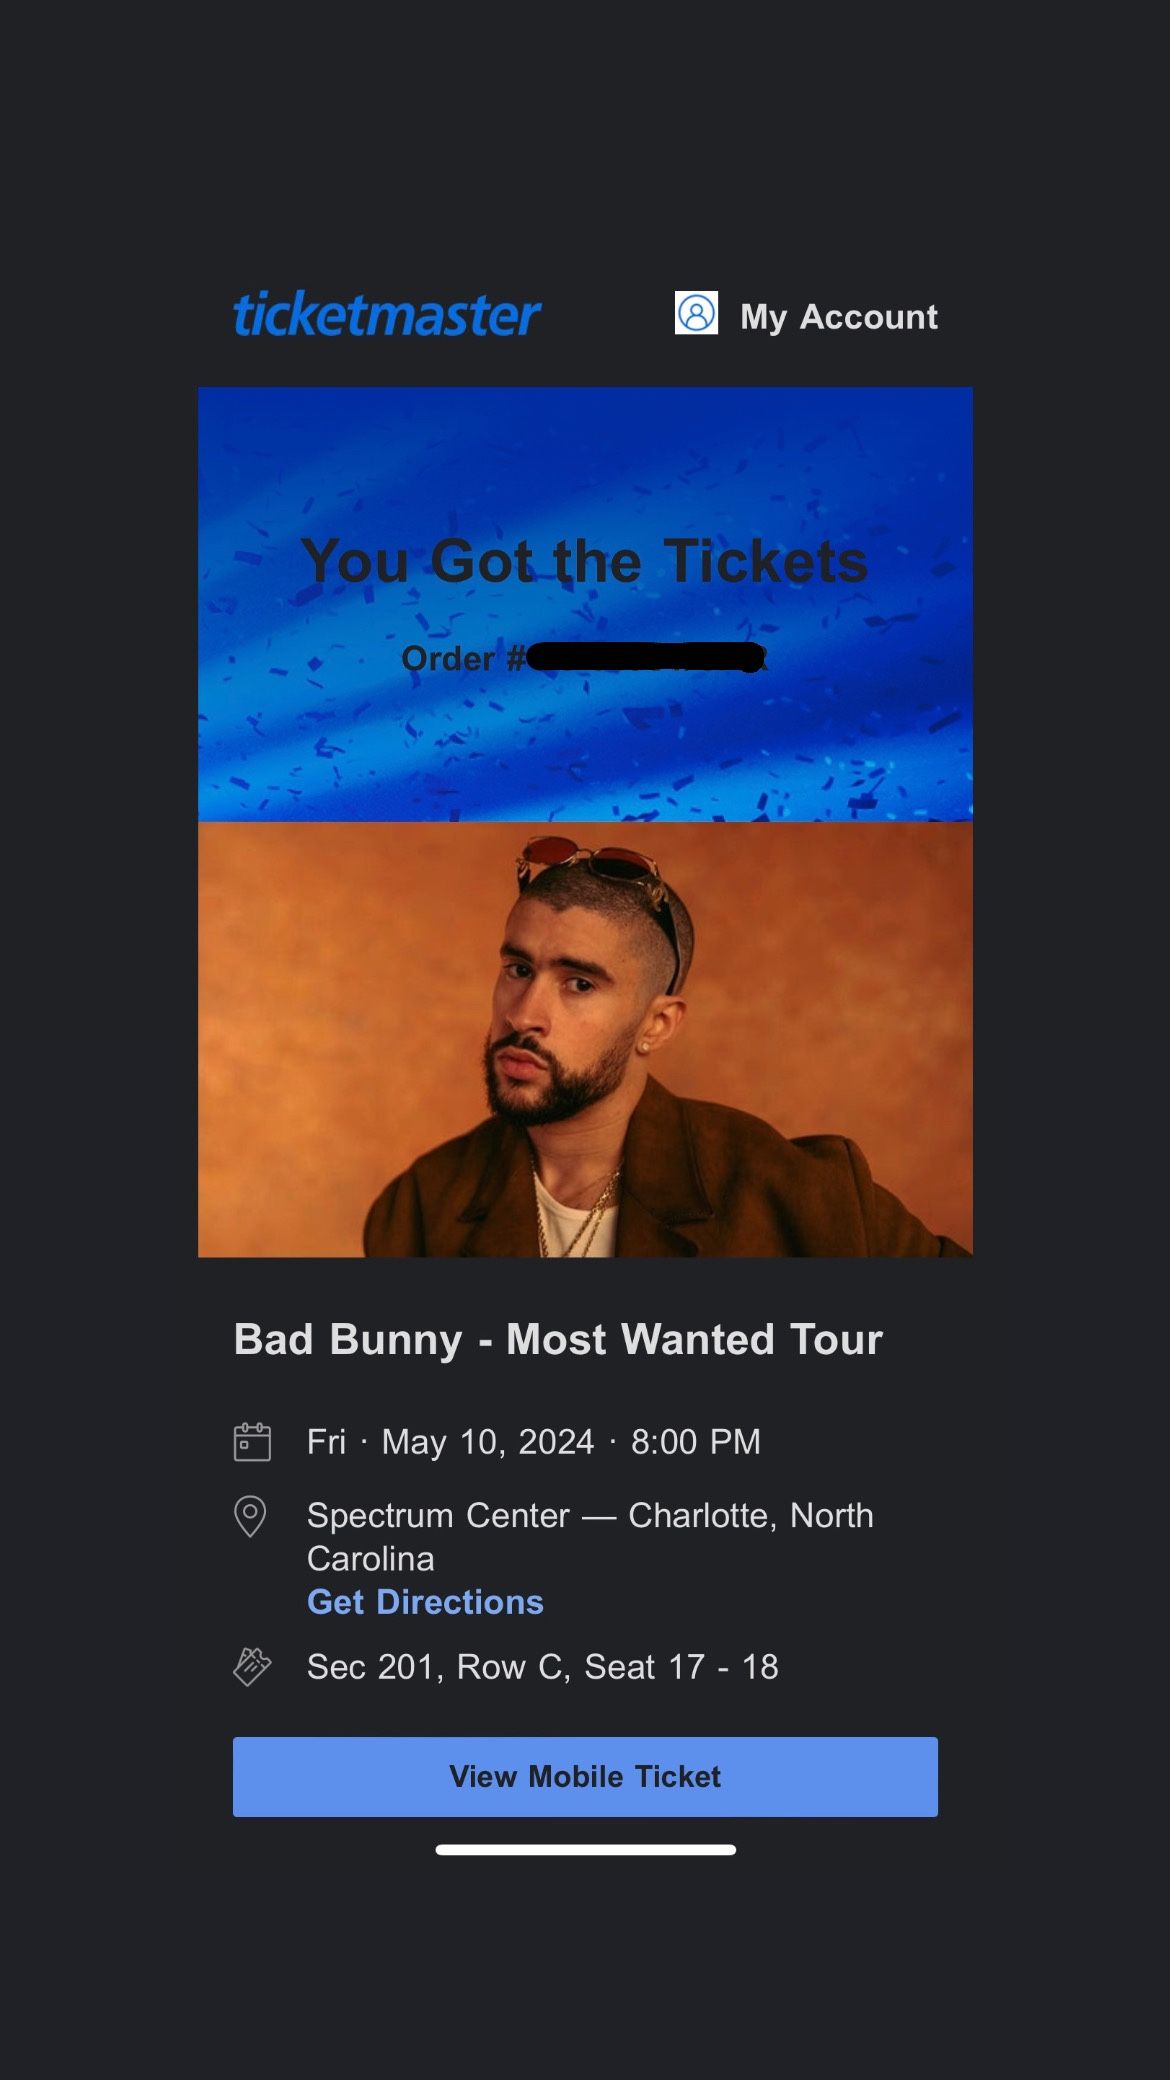 Bad Bunny - Most Wanted Tour (Charlotte - May 10)